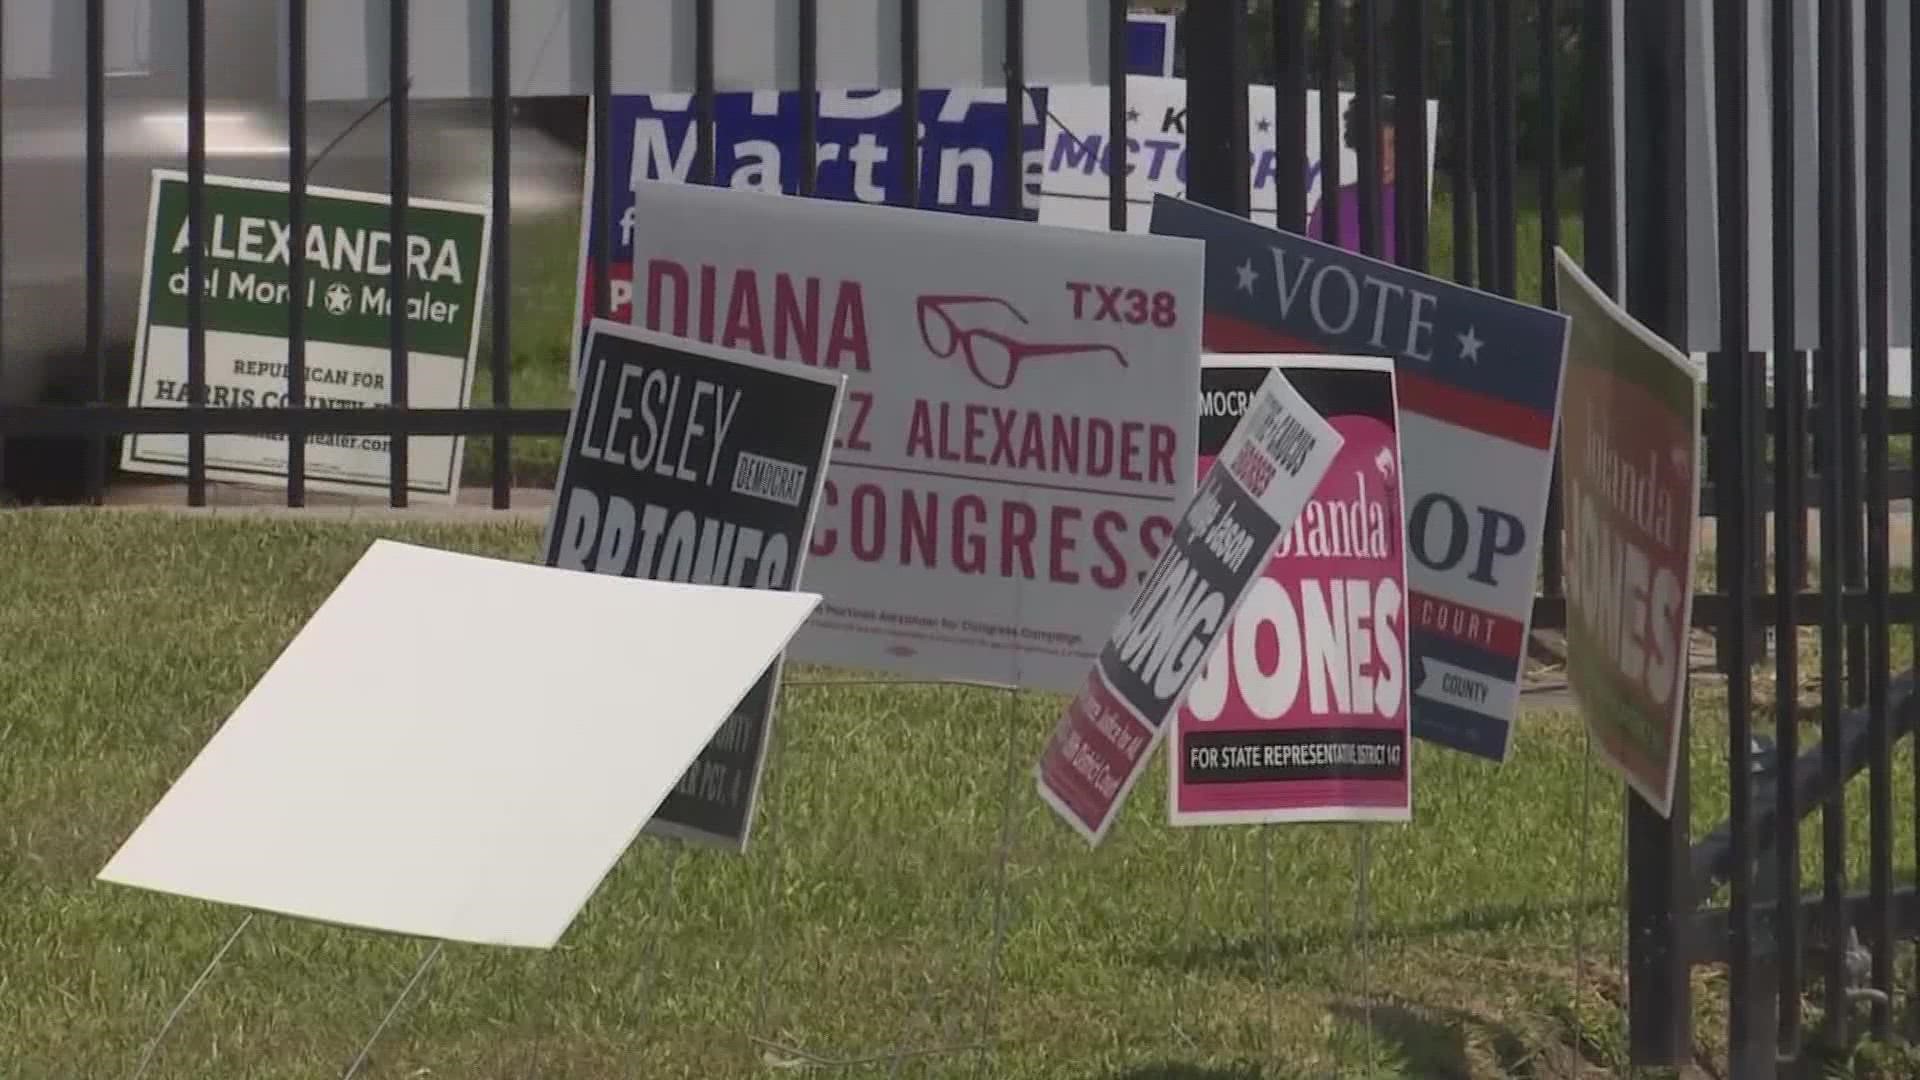 There will be a lot of eyes on Harris County, both for local election results as well as to see if things will run smoothly.